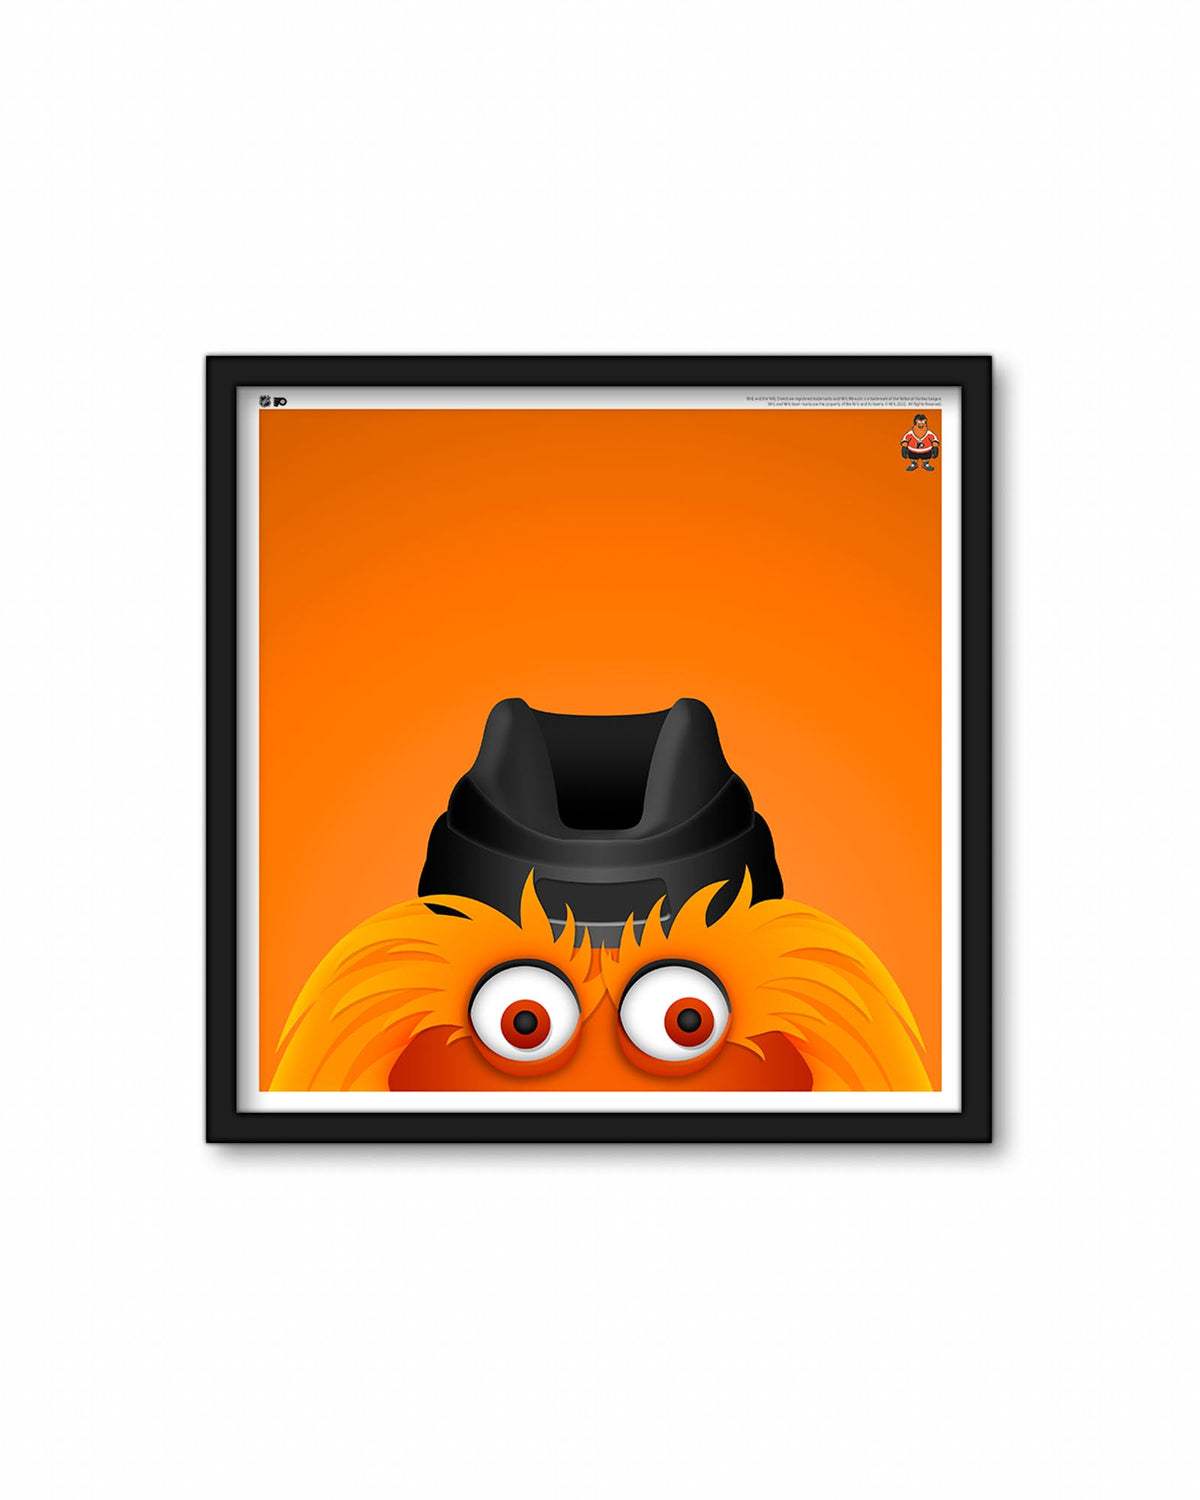 Minimalist Gritty Square Poster Print